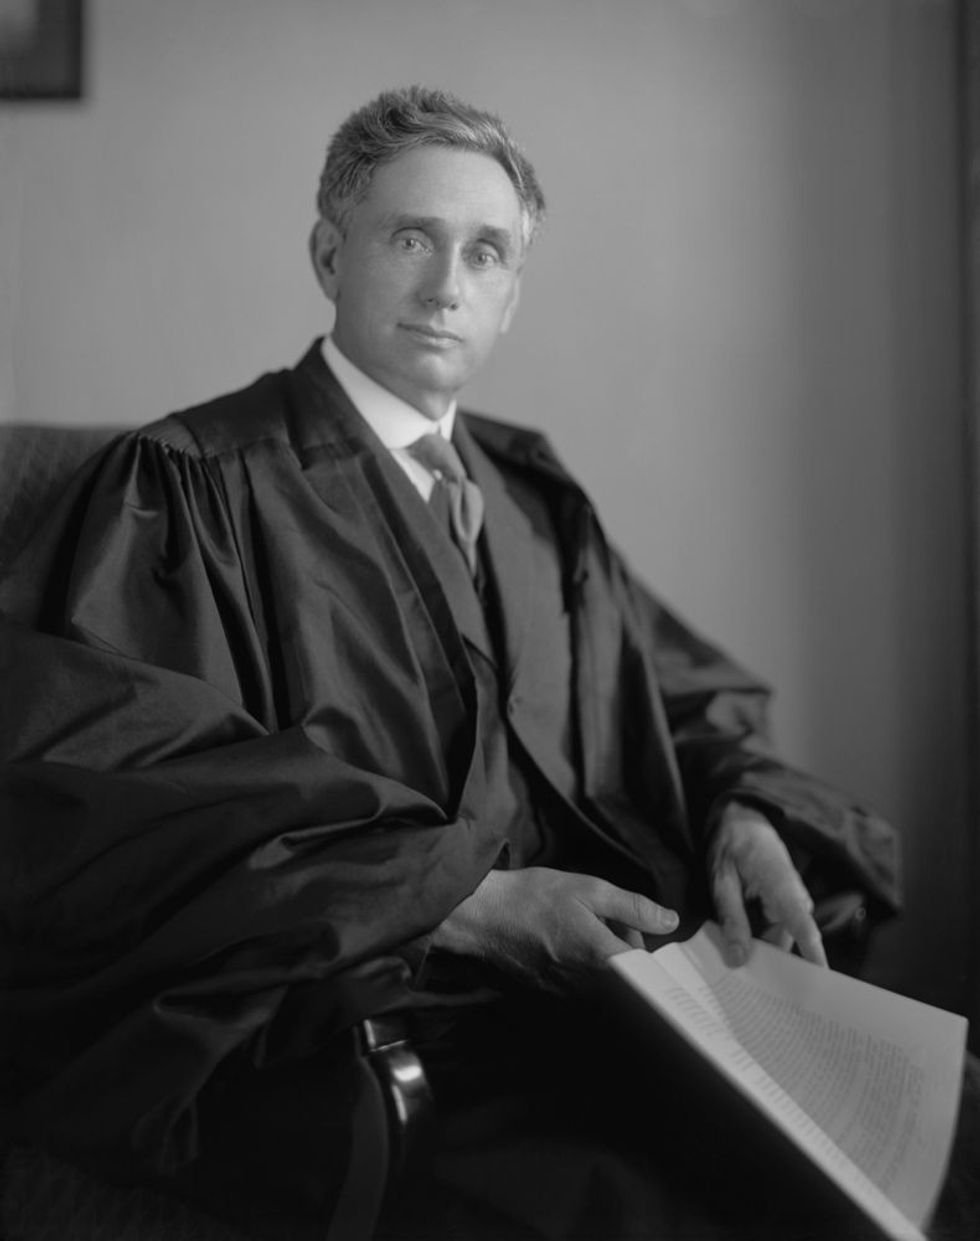 Louis Brandeis, was appointed to the U.S. Supreme Court by Woodrow Wilson in 1916.